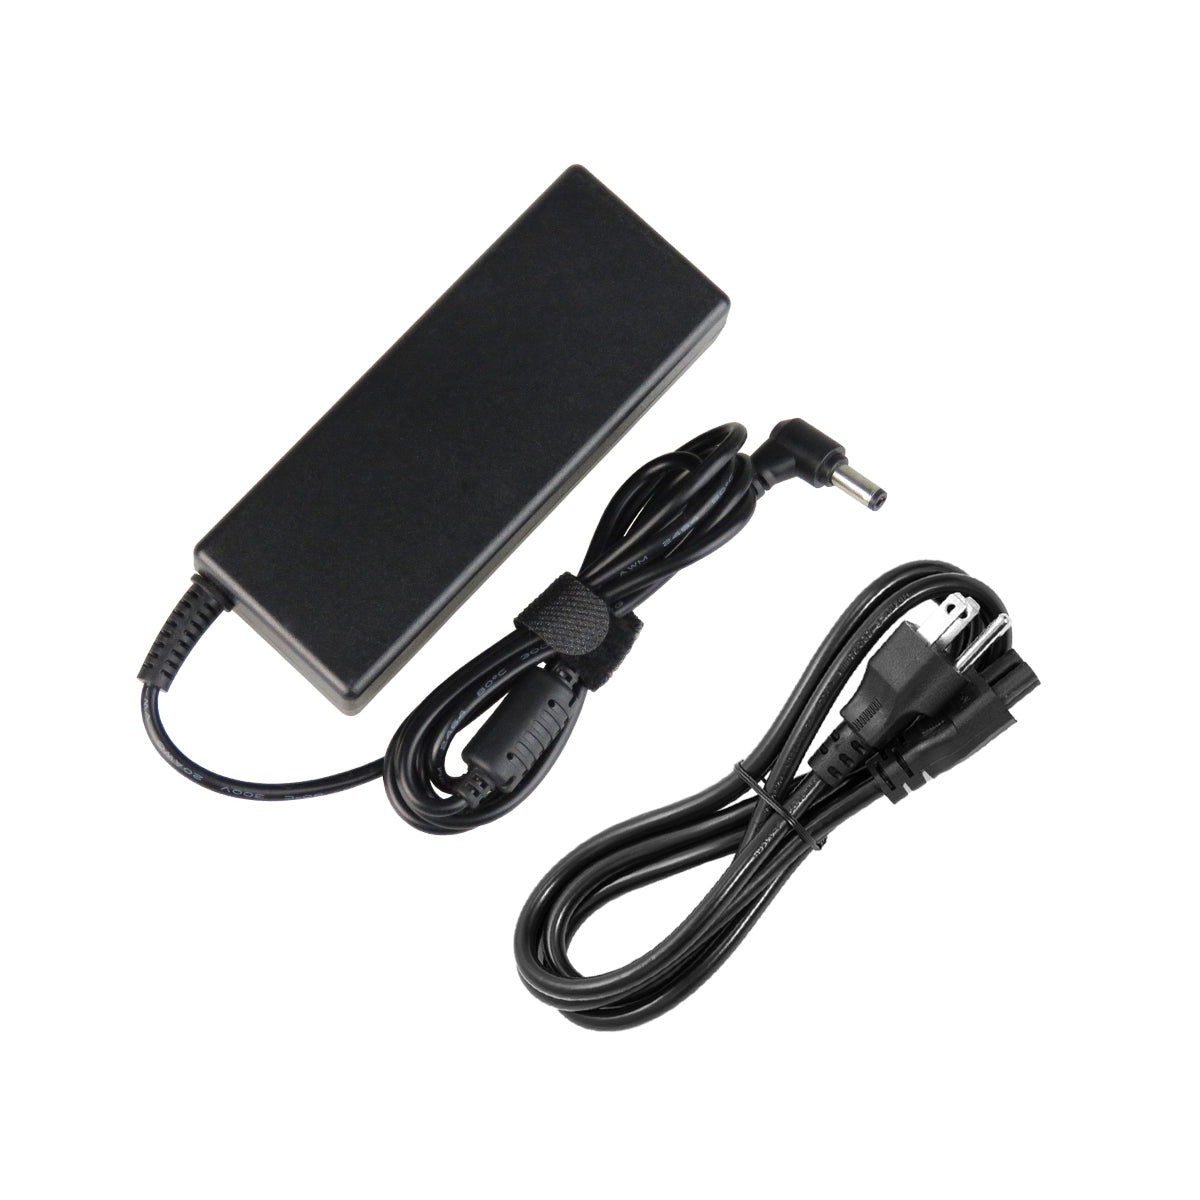 AC Adapter Charger for Toshiba Satellite c55 Notebook.